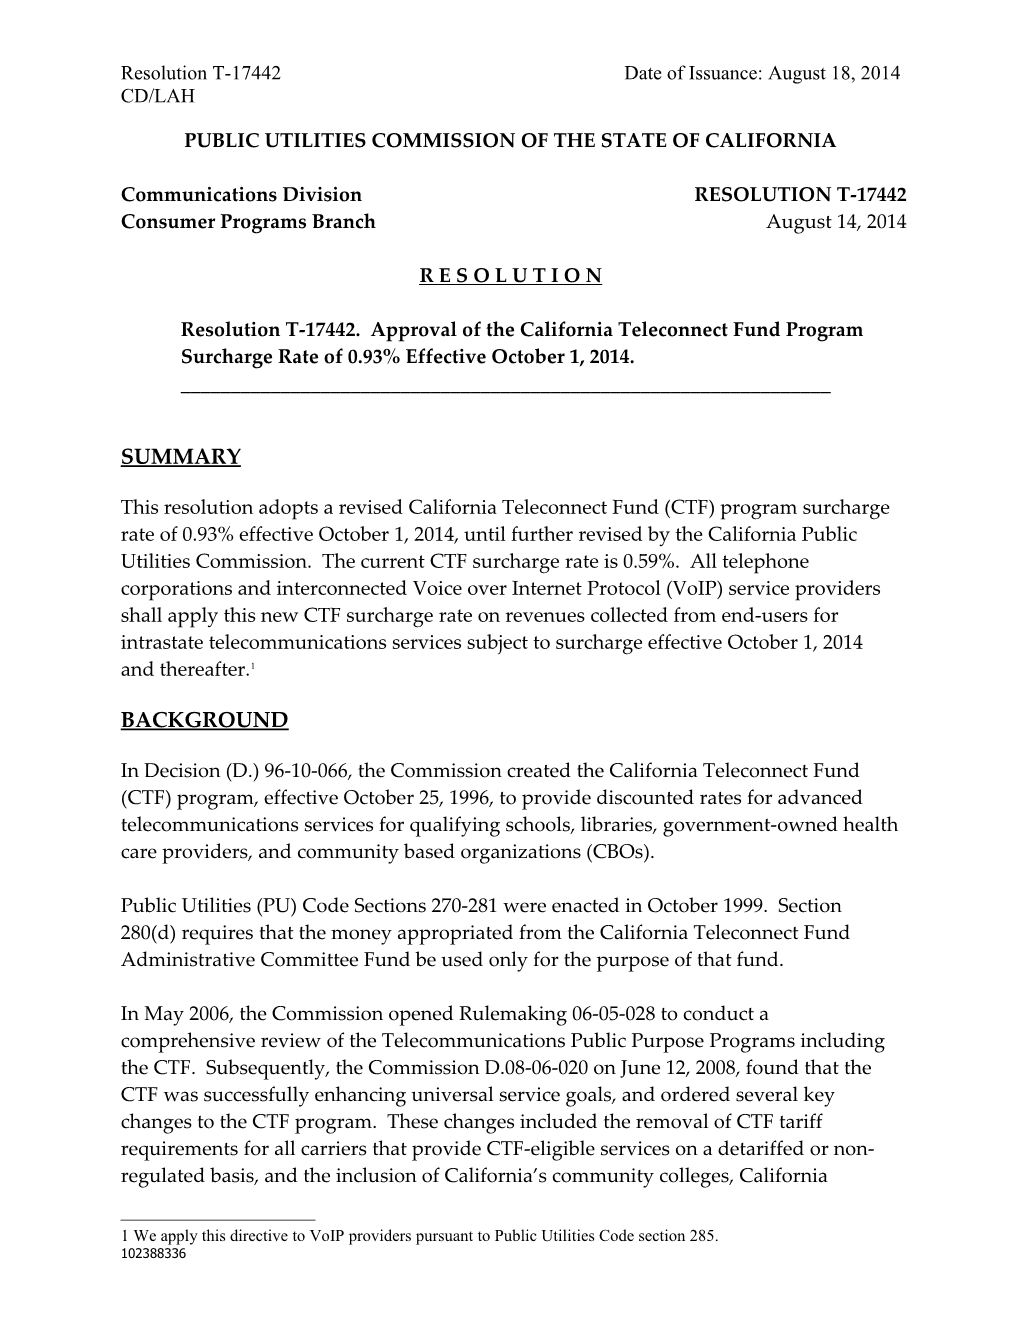 Public Utilities Commission of the State of California s150